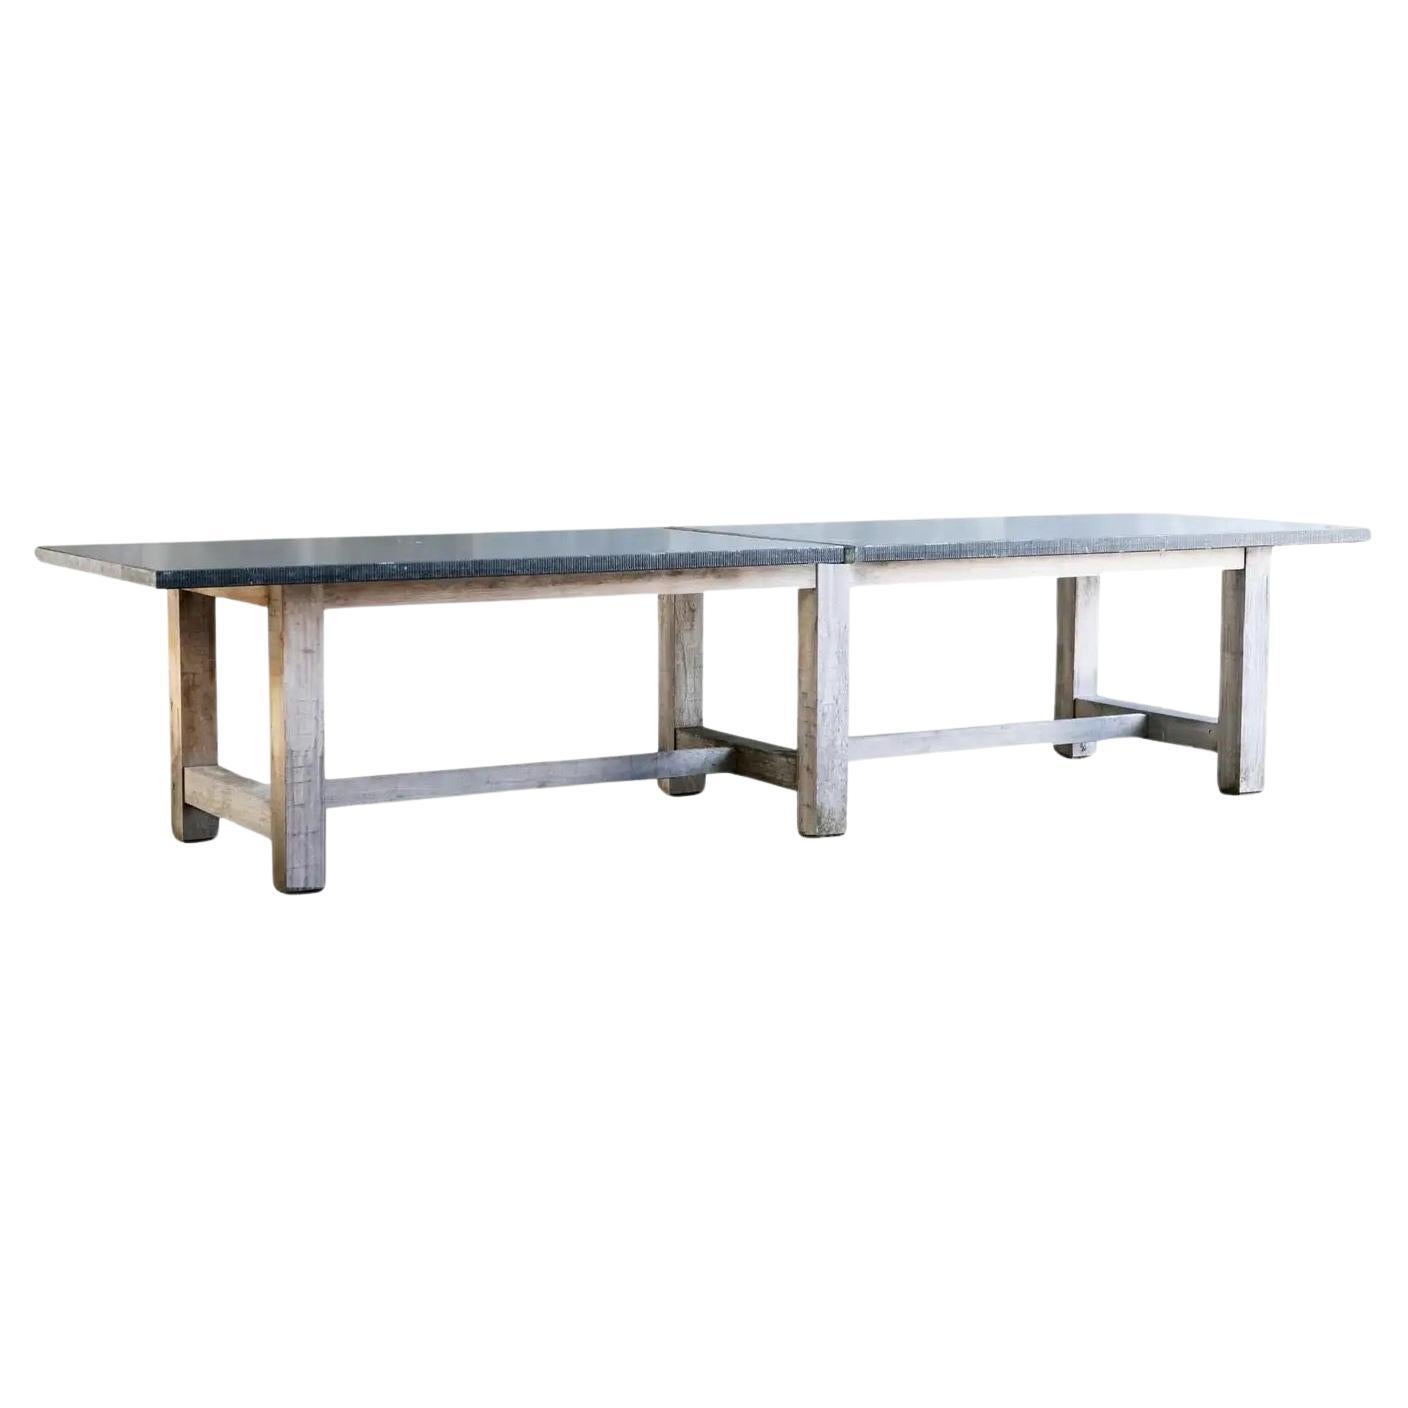 10'6" Solid Belgian Oak and Blue Stone Dining Table with 6 Legs Indoor/Outdoor 